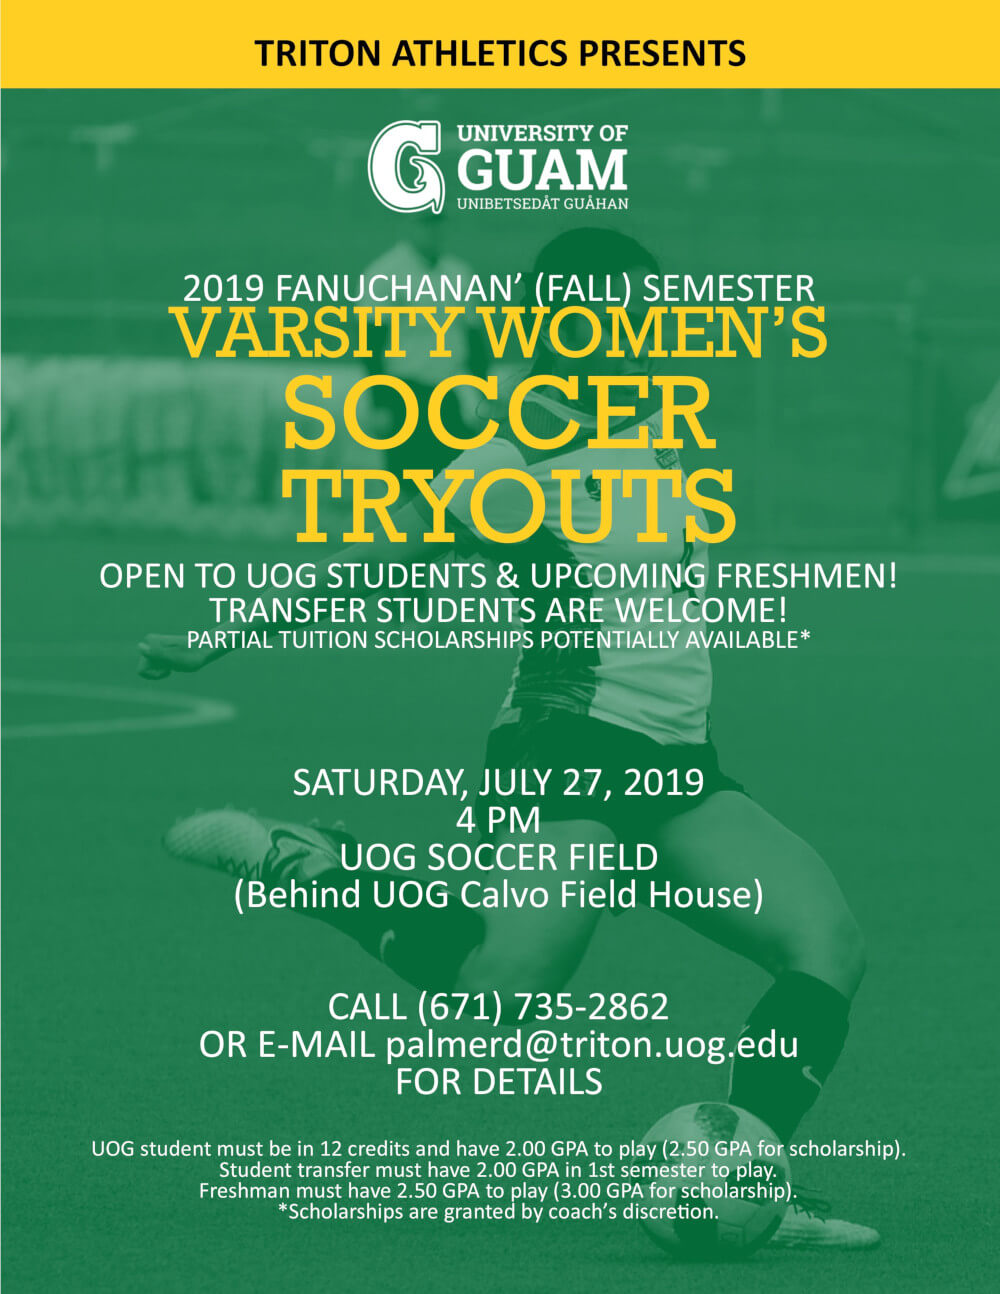 Women's soccer tryouts to be held July 27